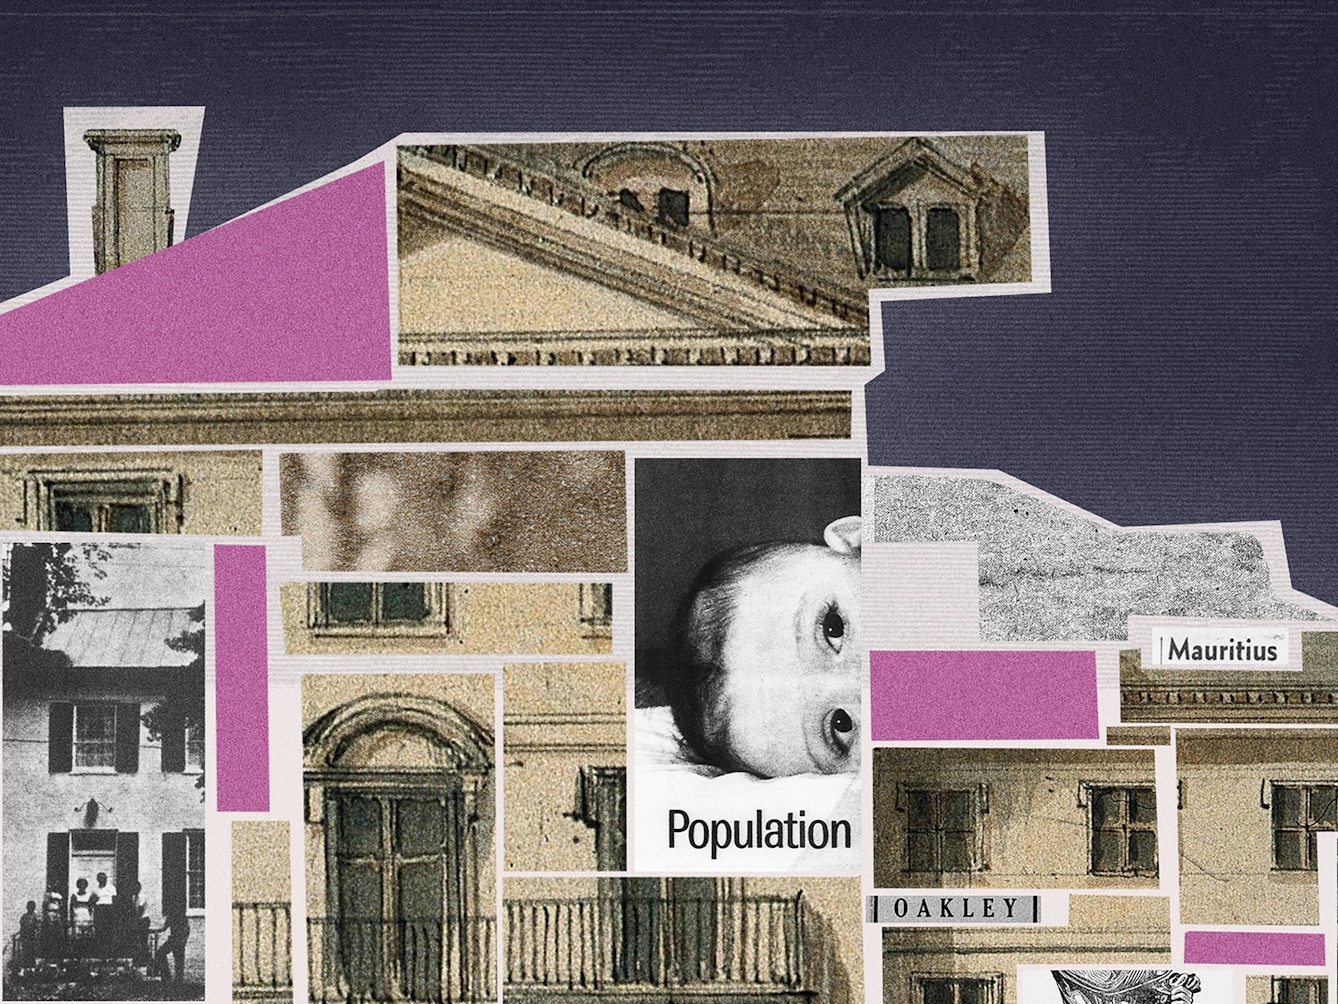 Crop from a larger digital collage. Shown is a building, labelled 'The Birthplace of'. The building's interior is filled with different collage elements, including newspaper cut-outs reading 'Beveridge', 'Ann', 'Richard', 'Governor', 'Population', 'Oakley', 'William' and 'Mauritius'. There are a number of black and white images, one of a baby lying down, one of a mother holding a baby, one of a child playing with coins on a table, and one of a child holding a bag. There are a number of windows and balconies, a chimney, and a central door with steps leading down from it.